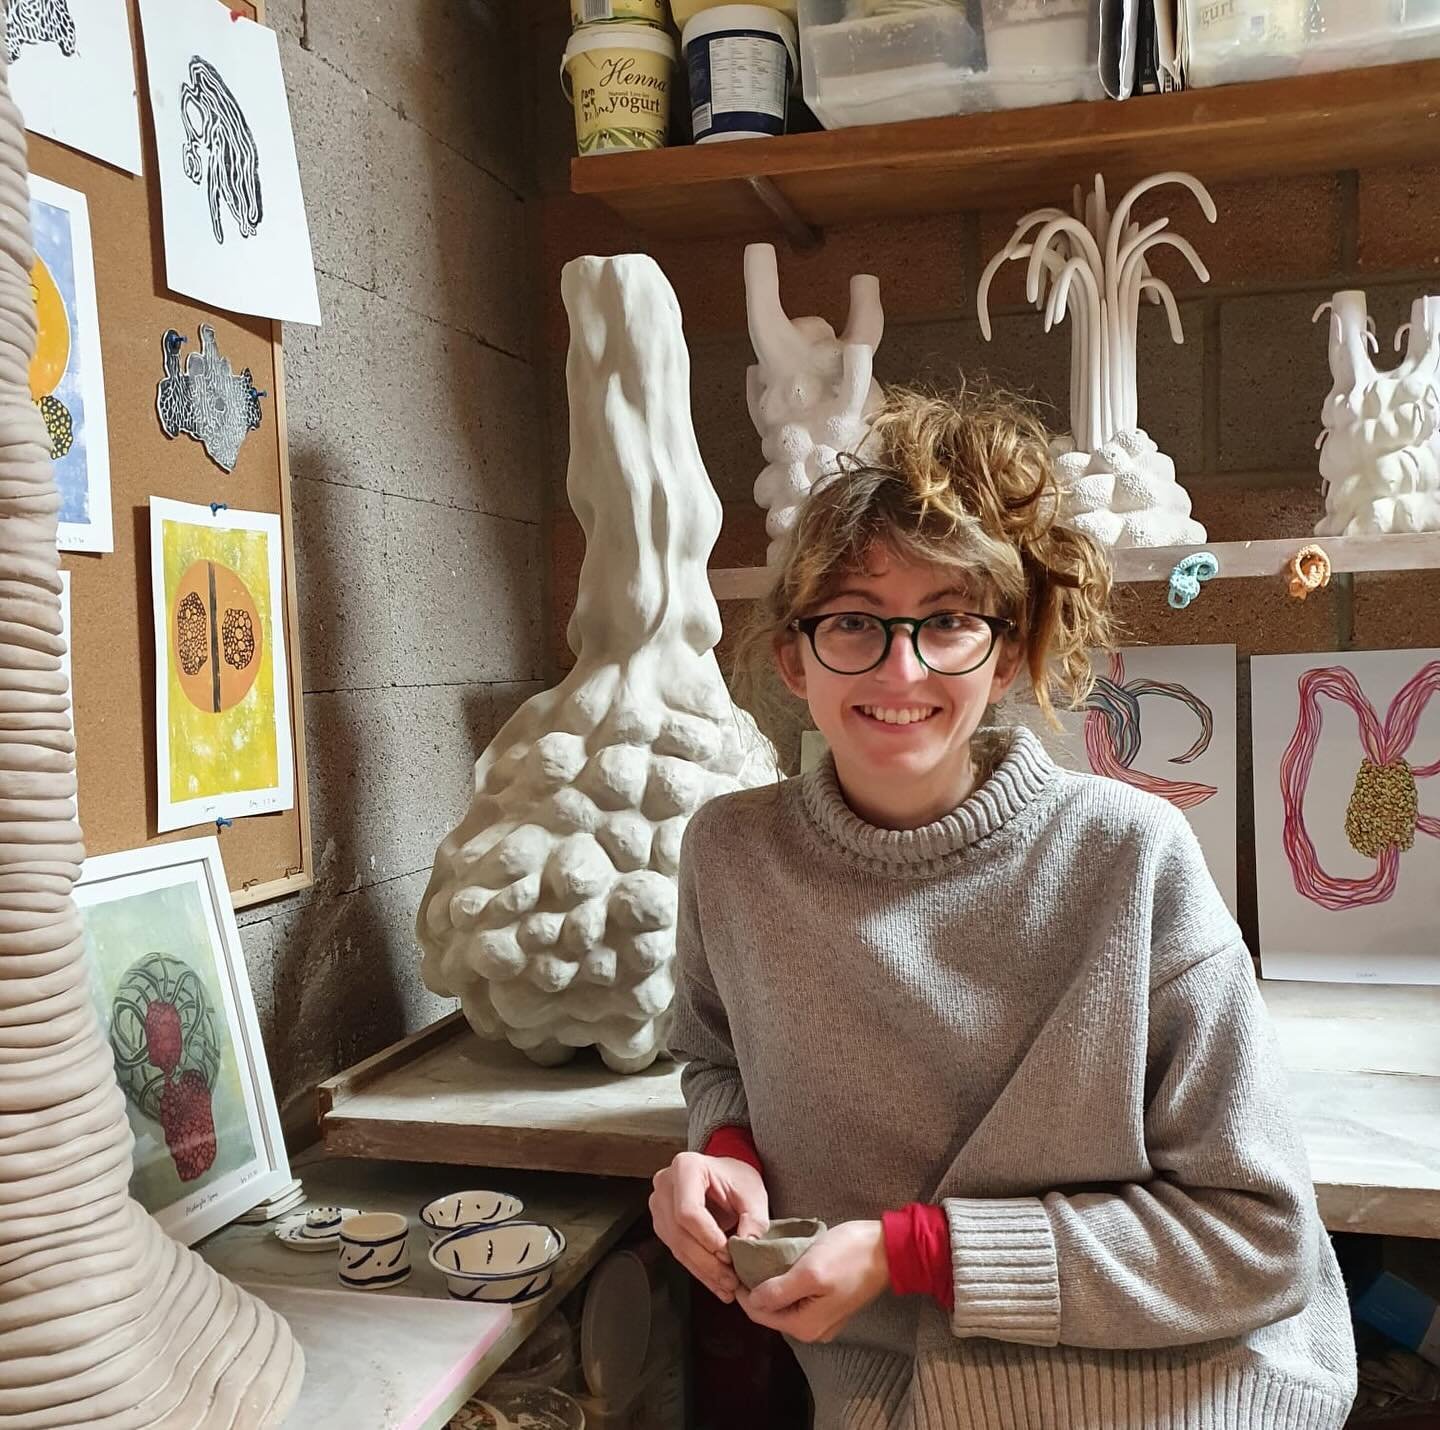 Clay workshops with Emily Stapleton Jefferis 🤖🦾🎨🔥

There are still a few places left for these two fun and creative hands-on workshops led by Emily on Monday 14 (4pm- 7pm) and Tuesday 15 May (10am- 1pm)

The workshops will start with a discussion